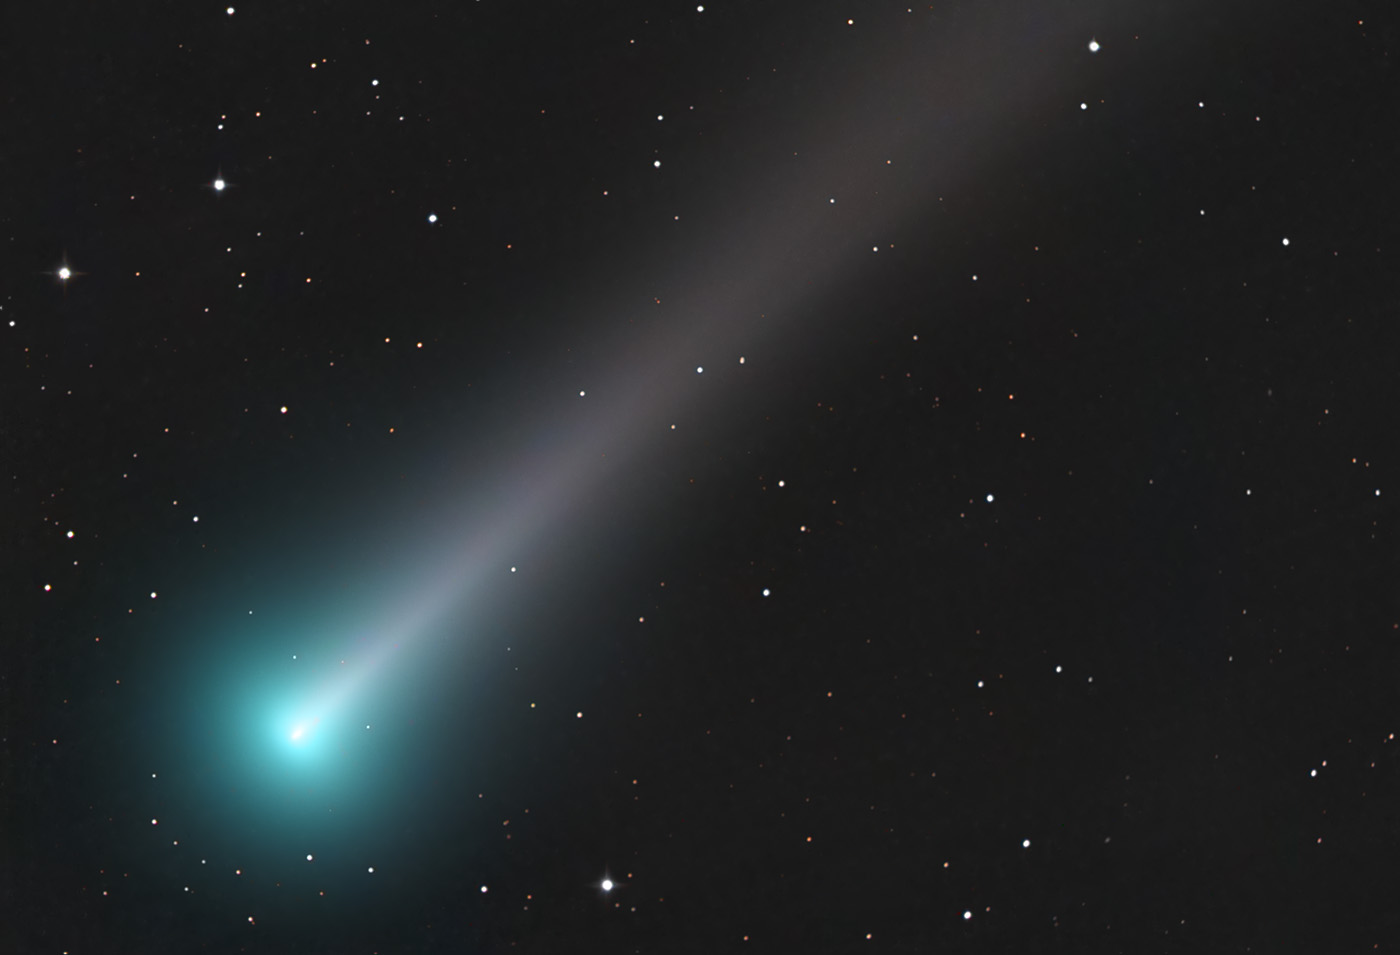 Comet Leonard is at its closest to Earth right now. Here’s how to spot it.